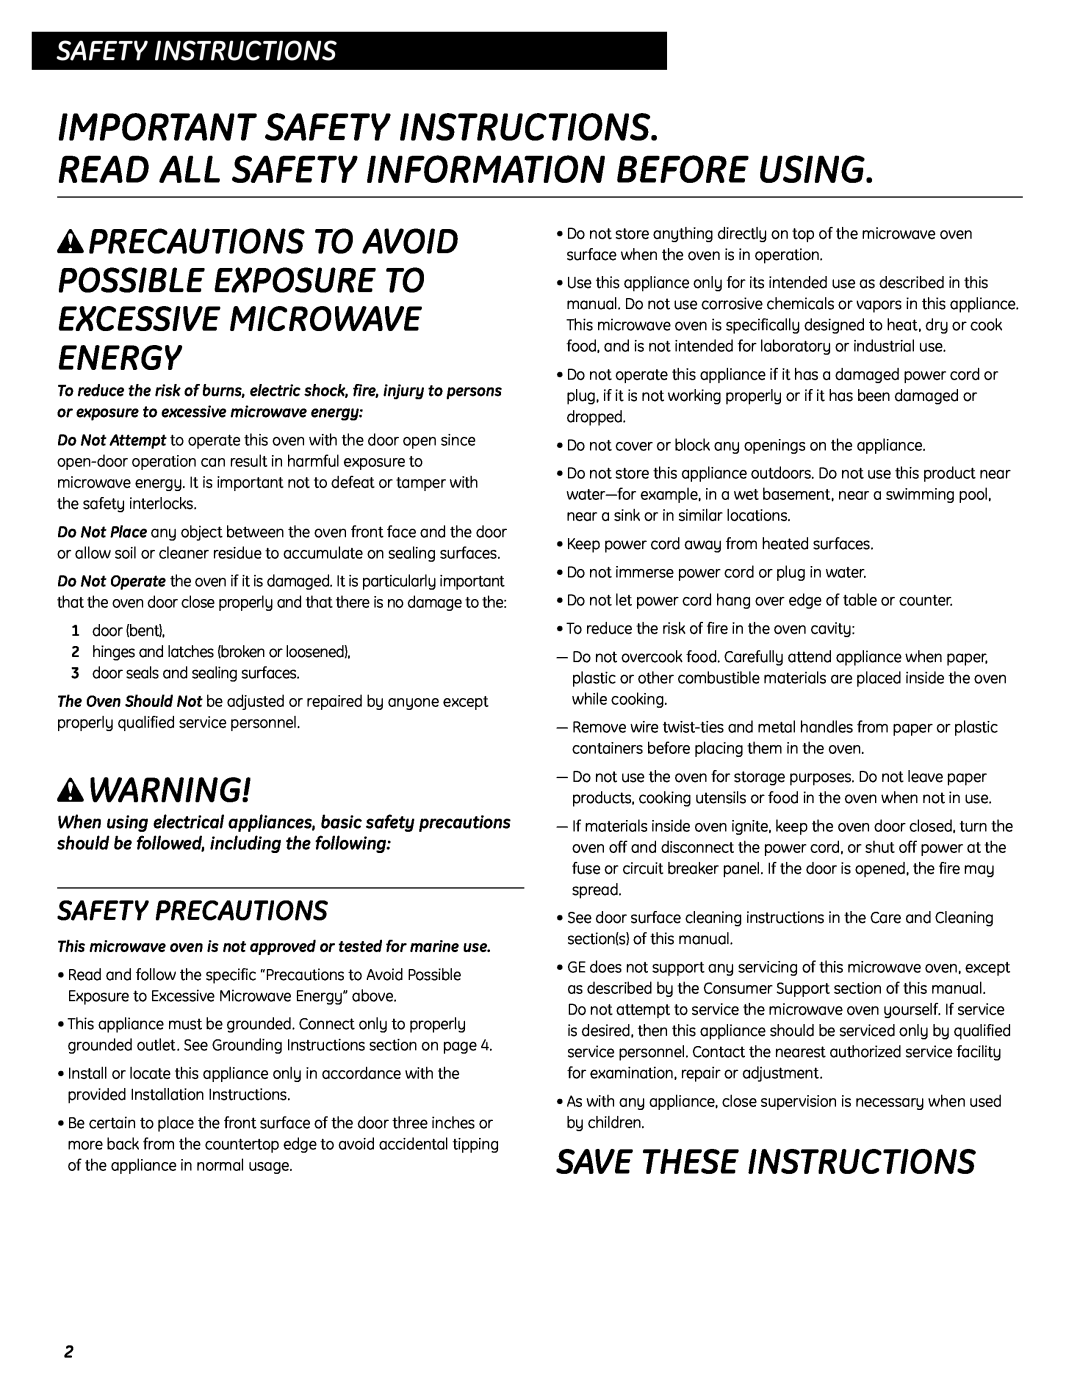 GE WES0930 Important Safety Instructions, Read All Safety Information Before Using, wPRECAUTIONS TO AVOID, w WARNING 